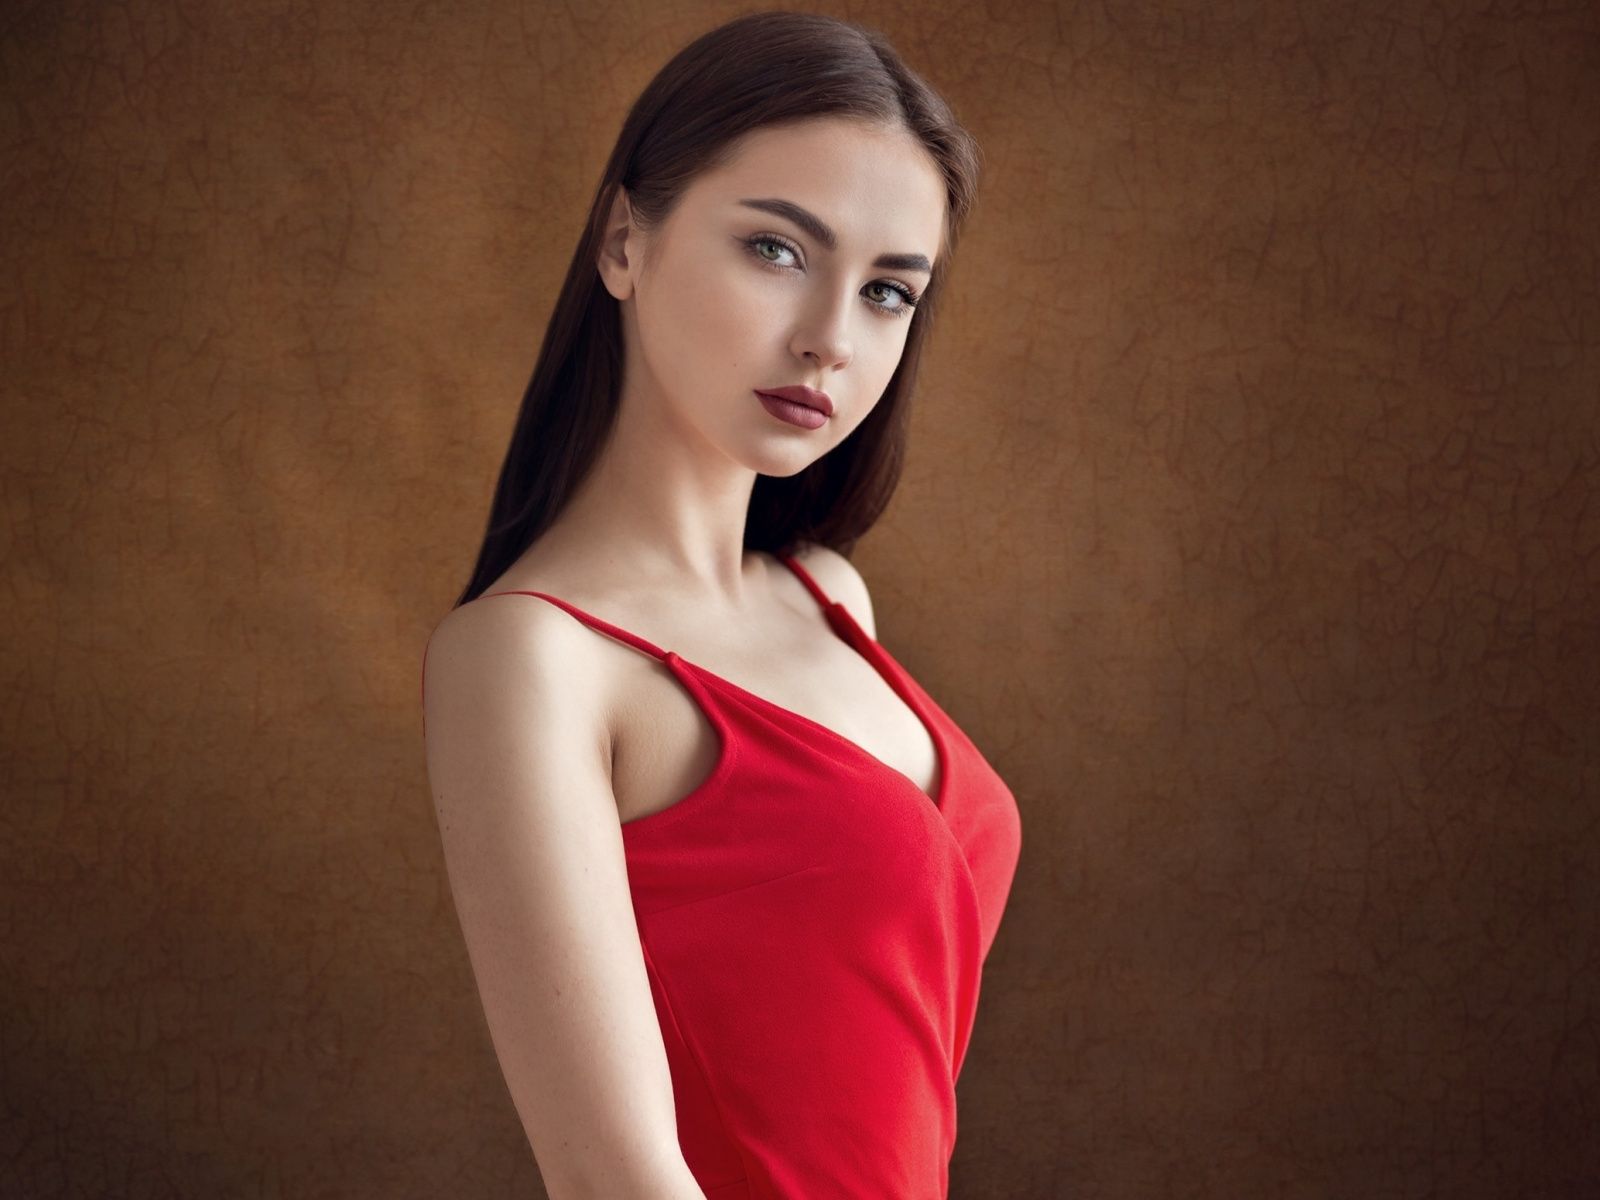 Red dress, woman model, pretty and beautiful, 1600x1200 wallpaper. Simple background, Dark hair, Girl